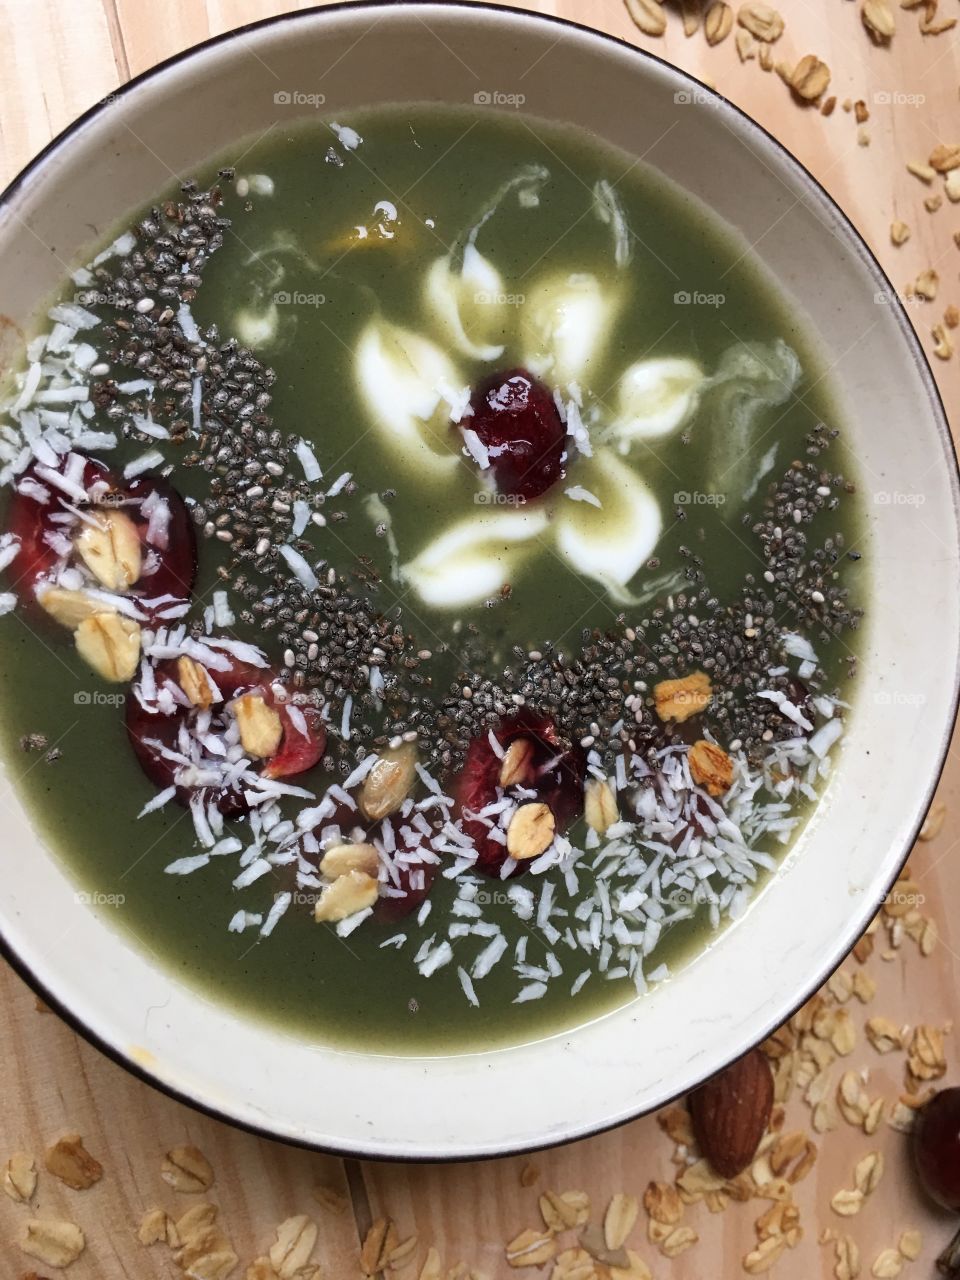 Green Cherry Almond Smoothie with zen cherry blossom flower design, coconut, chia and oatmeal inspirational healthy eating smoothie bowl design photography vertical background part of a series 